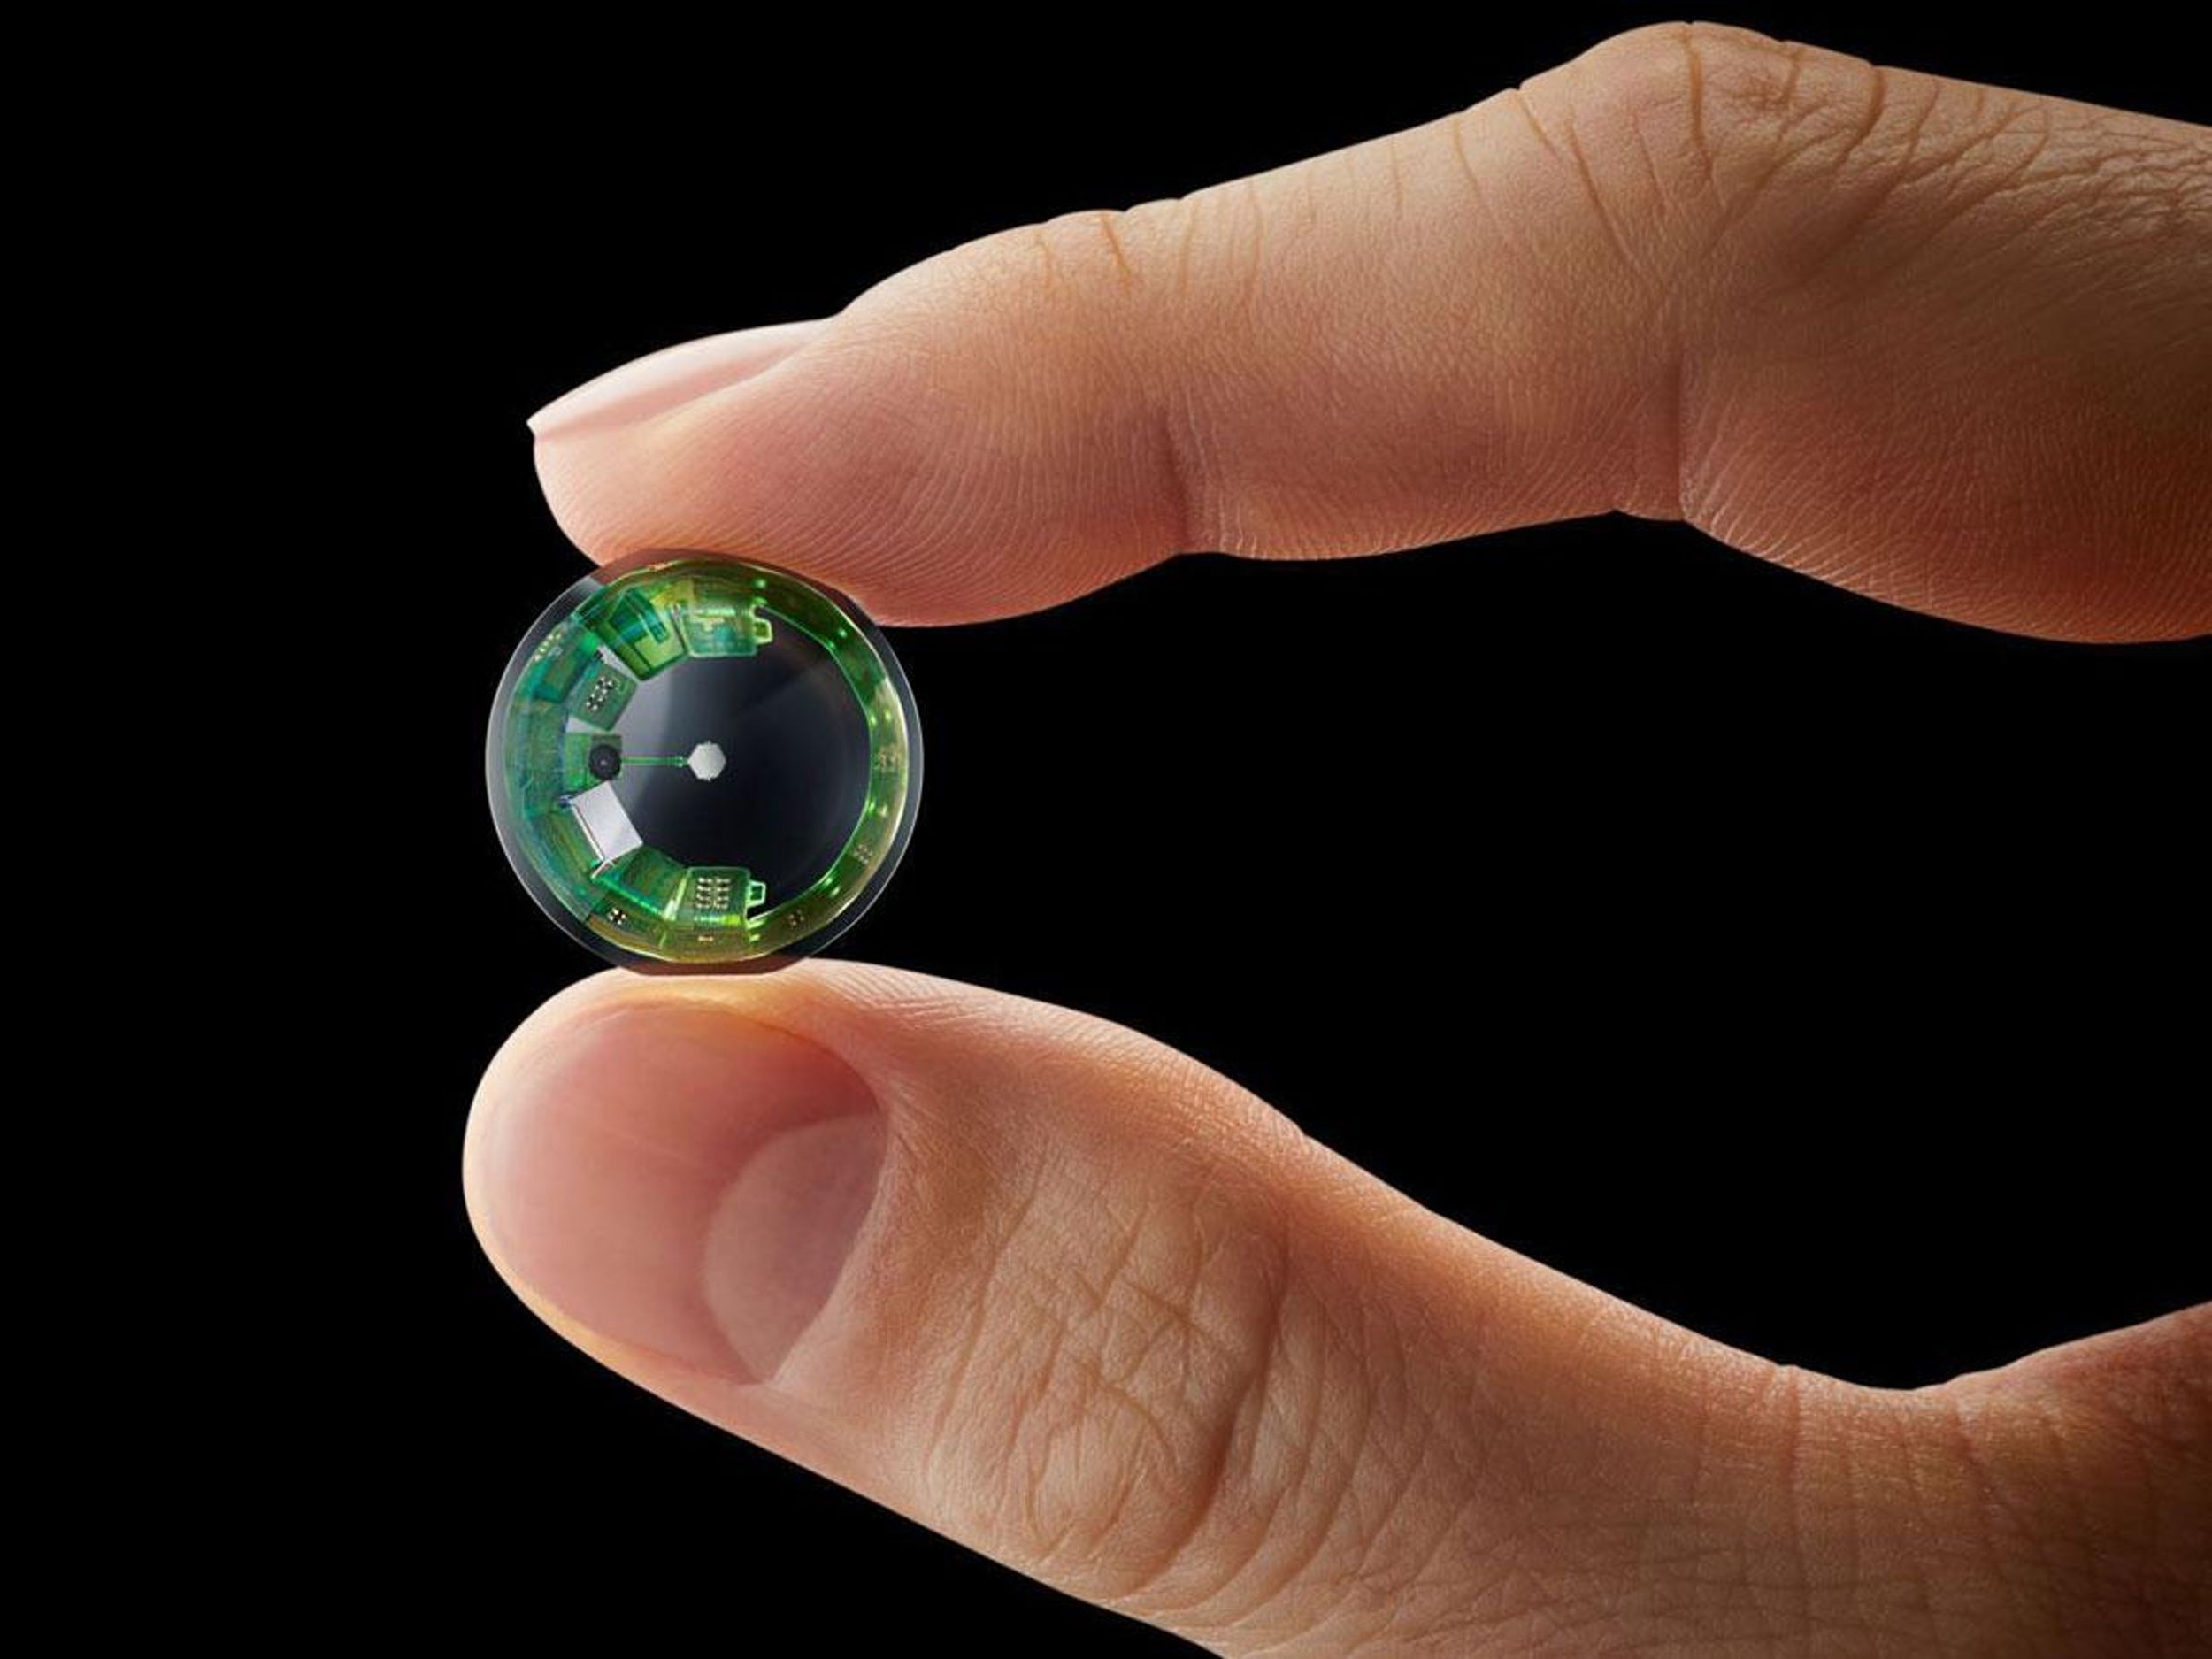 Two fingers hold a contact lens with a ring of circuitry on its outer edge